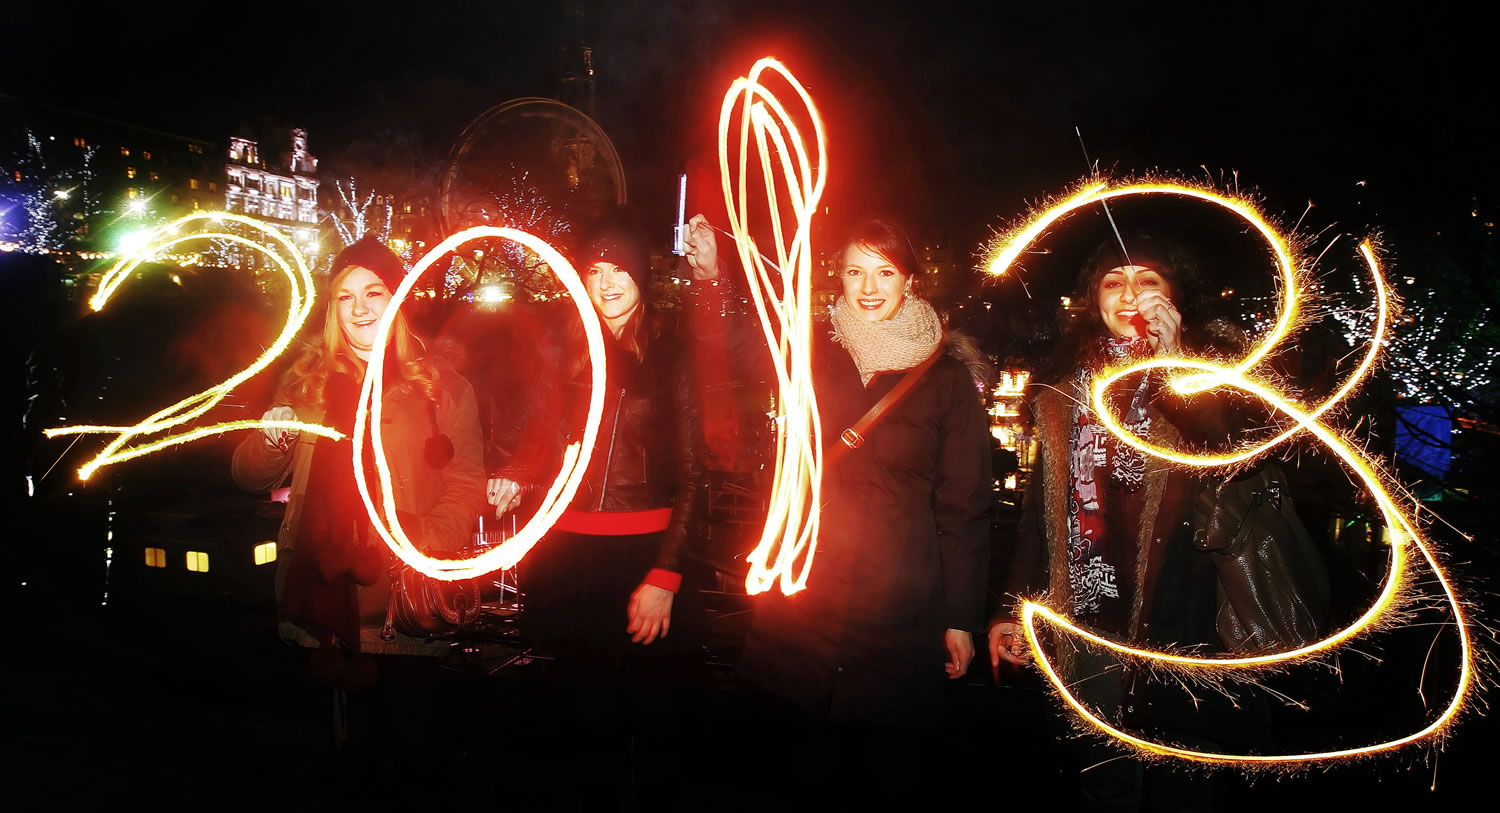 Katy Saunders, left, Alex Mueller, center left, Rebekka Frank and Arina Motamedi, right, play with sparklers ahead of welcoming in the new year during the 2013 Edinburgh Hogmanay celebrations, Scotland, Monday December 31, 2012. See PA story SOCIAL NewYear.